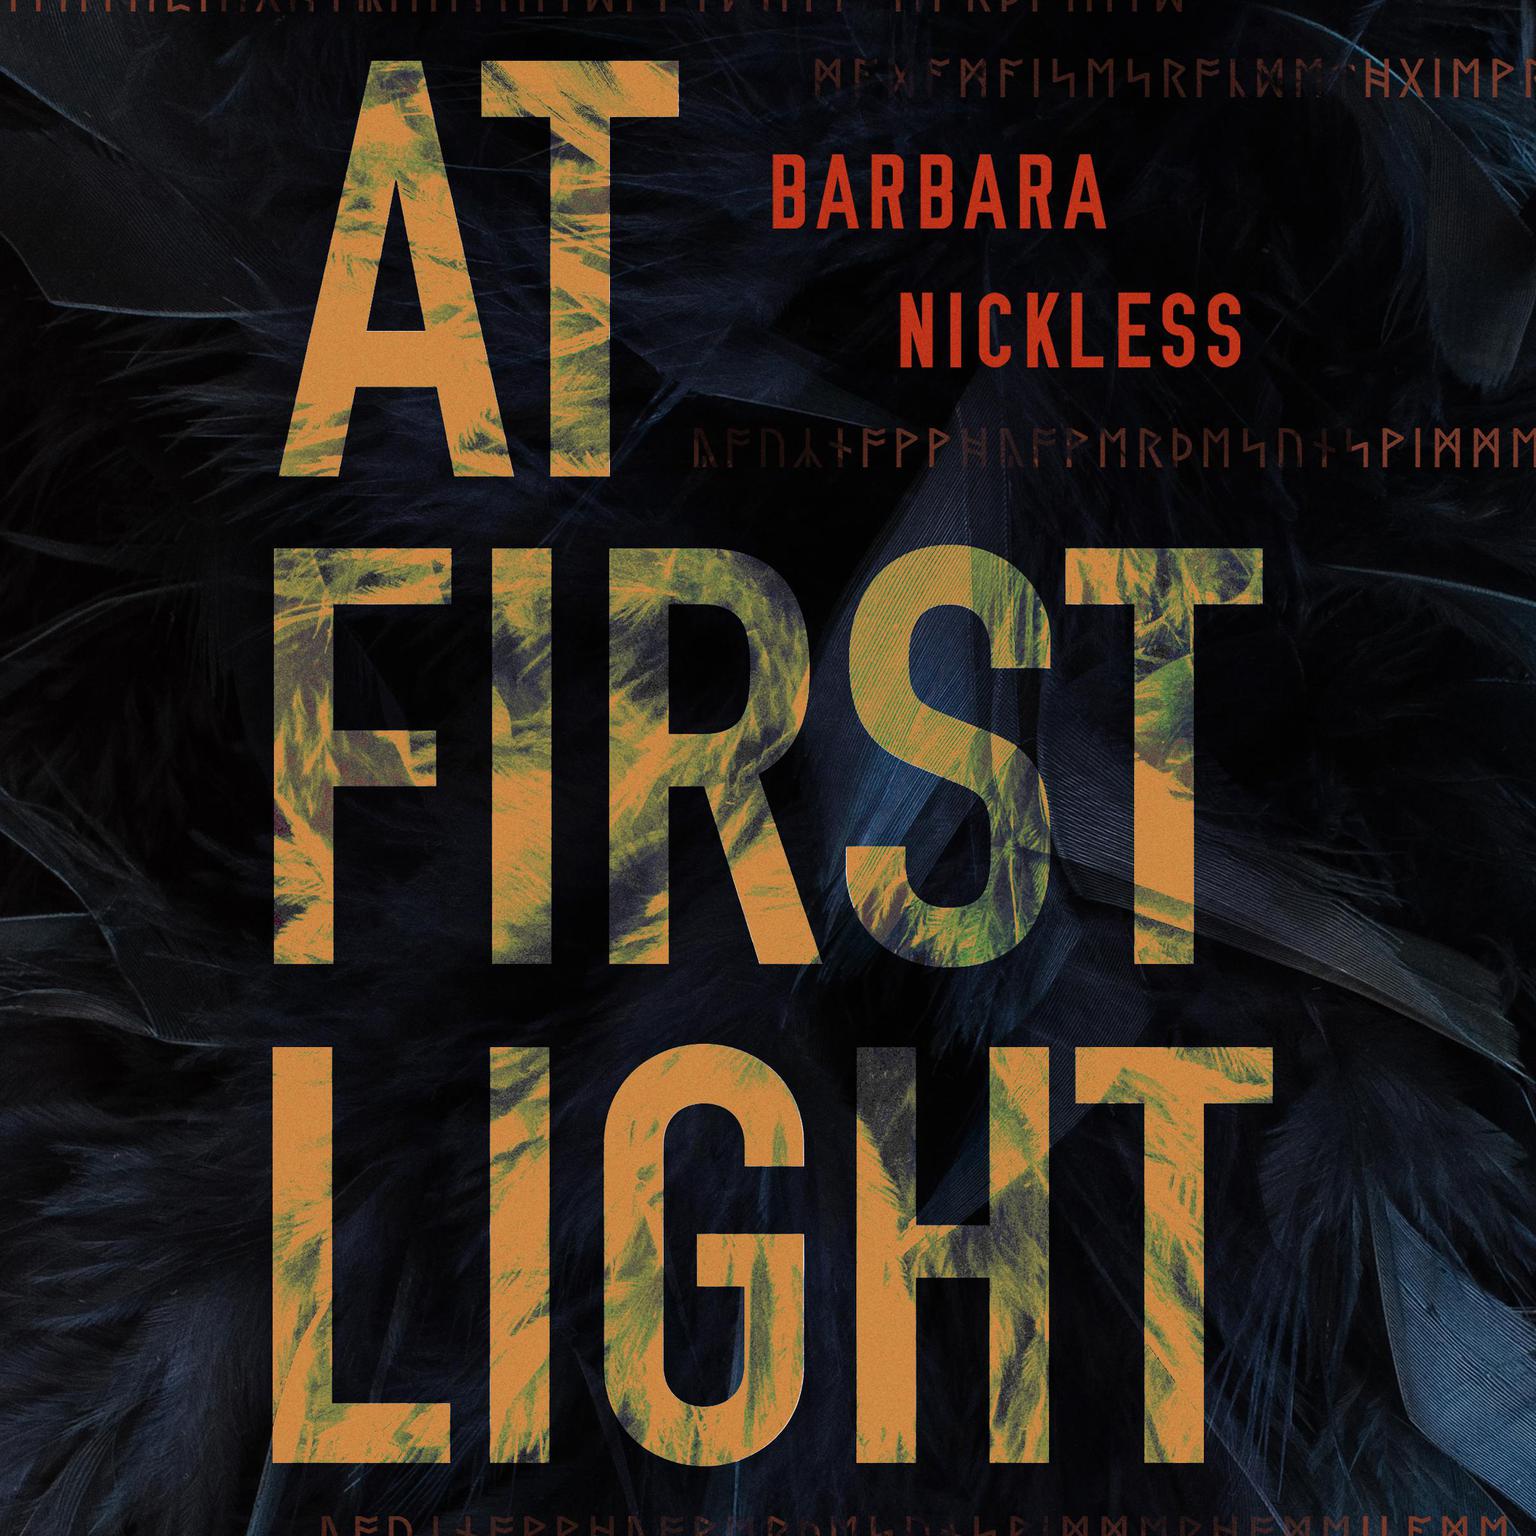 At First Light Audiobook, by Barbara Nickless